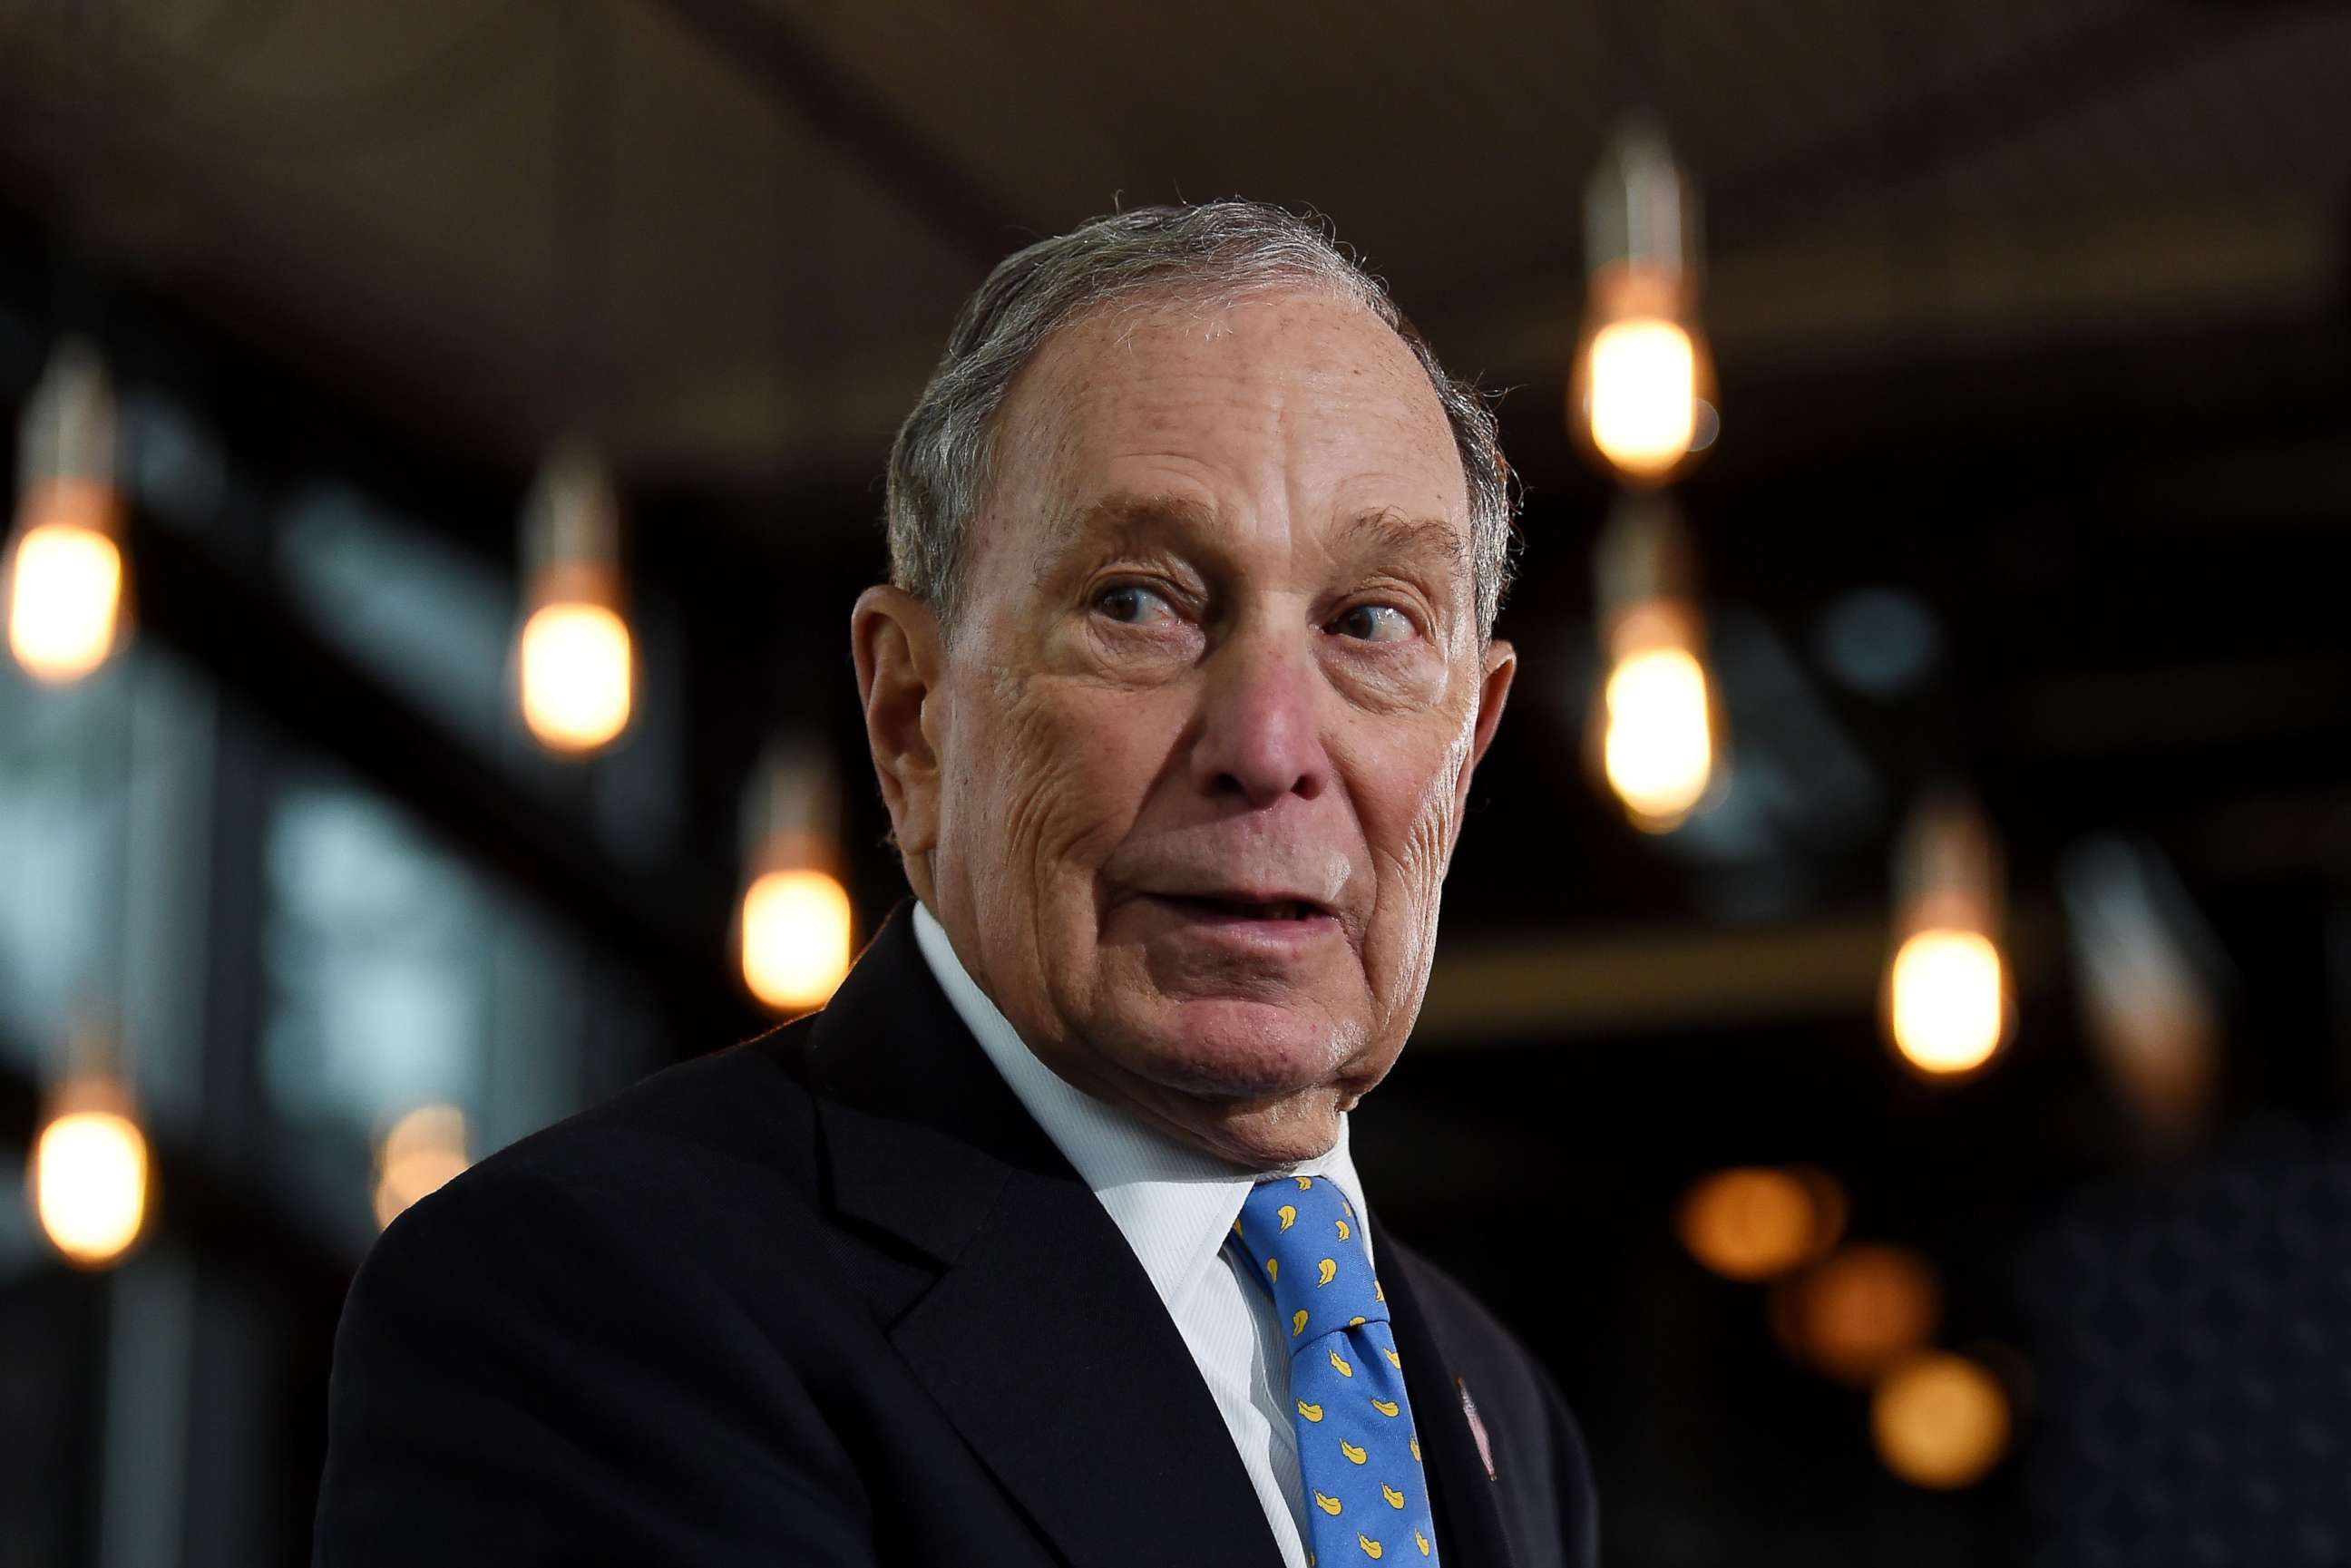 PHOTO: Democratic presidential candidate Michael Bloomberg speaks about his plan for clean energy during a campaign event at the Blackwall Hitch restaurant in Alexandria, Virginia, Dec. 13, 2019.